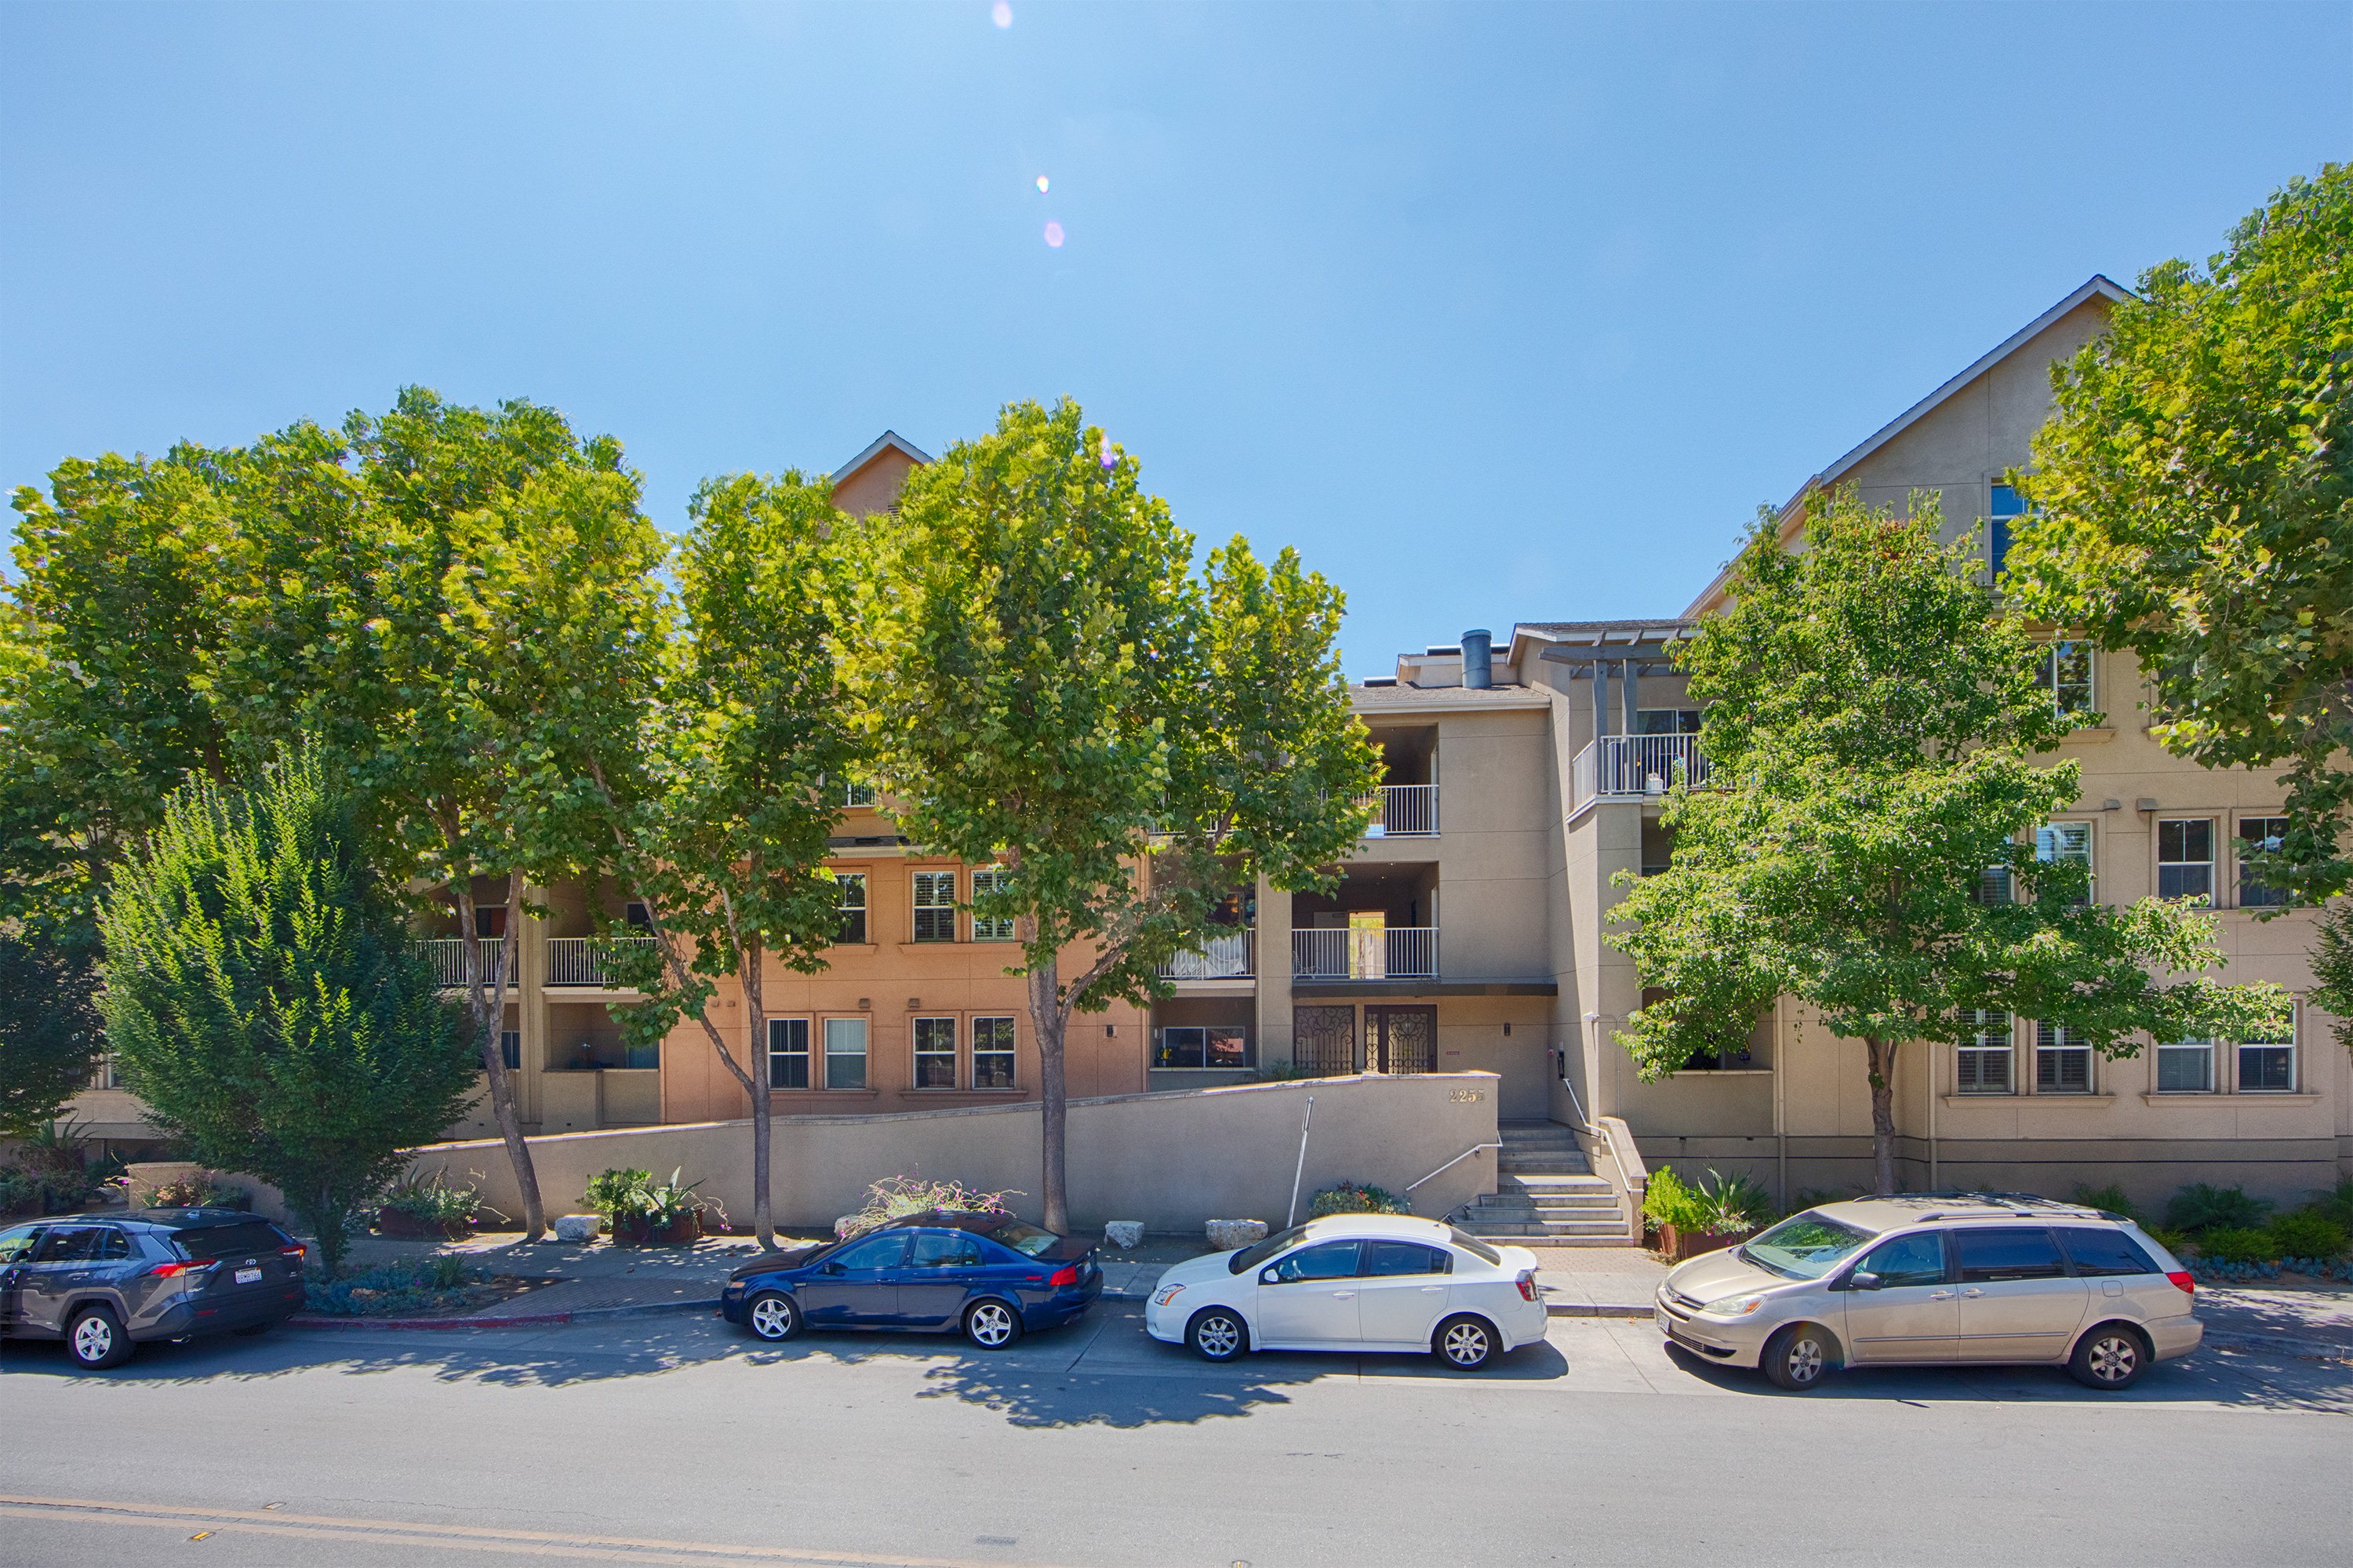 2255 Showers Dr #111, Mountain View 94040 - Showers Dr 2255 111 